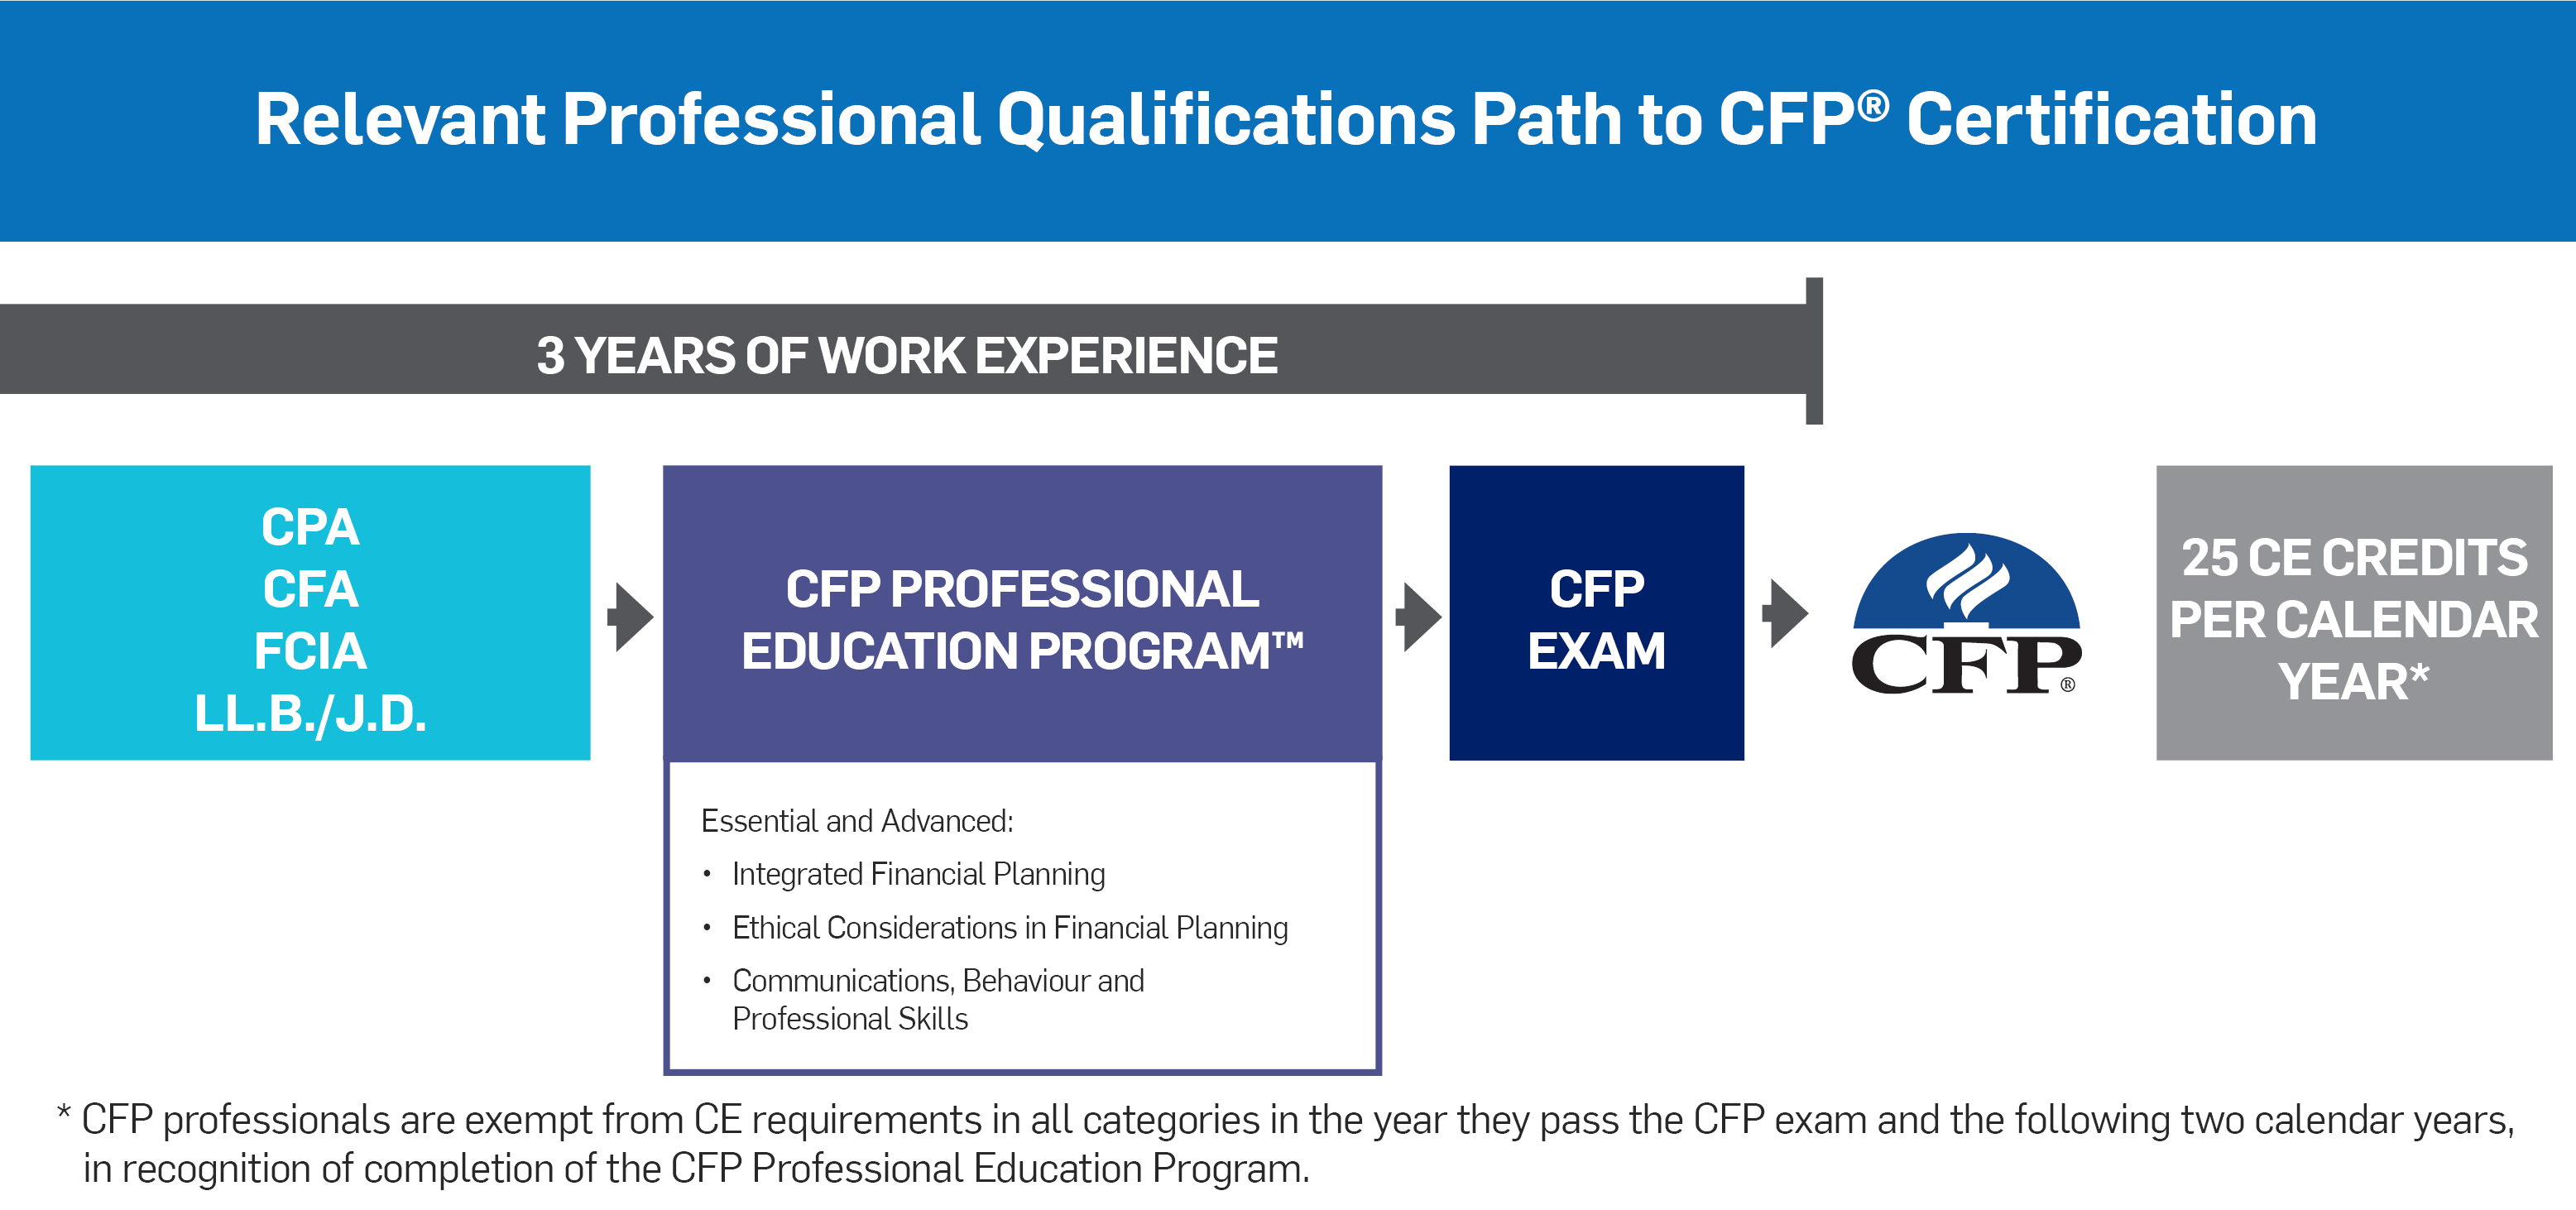 Relevant Professional Qualifications Path to CFP Certification